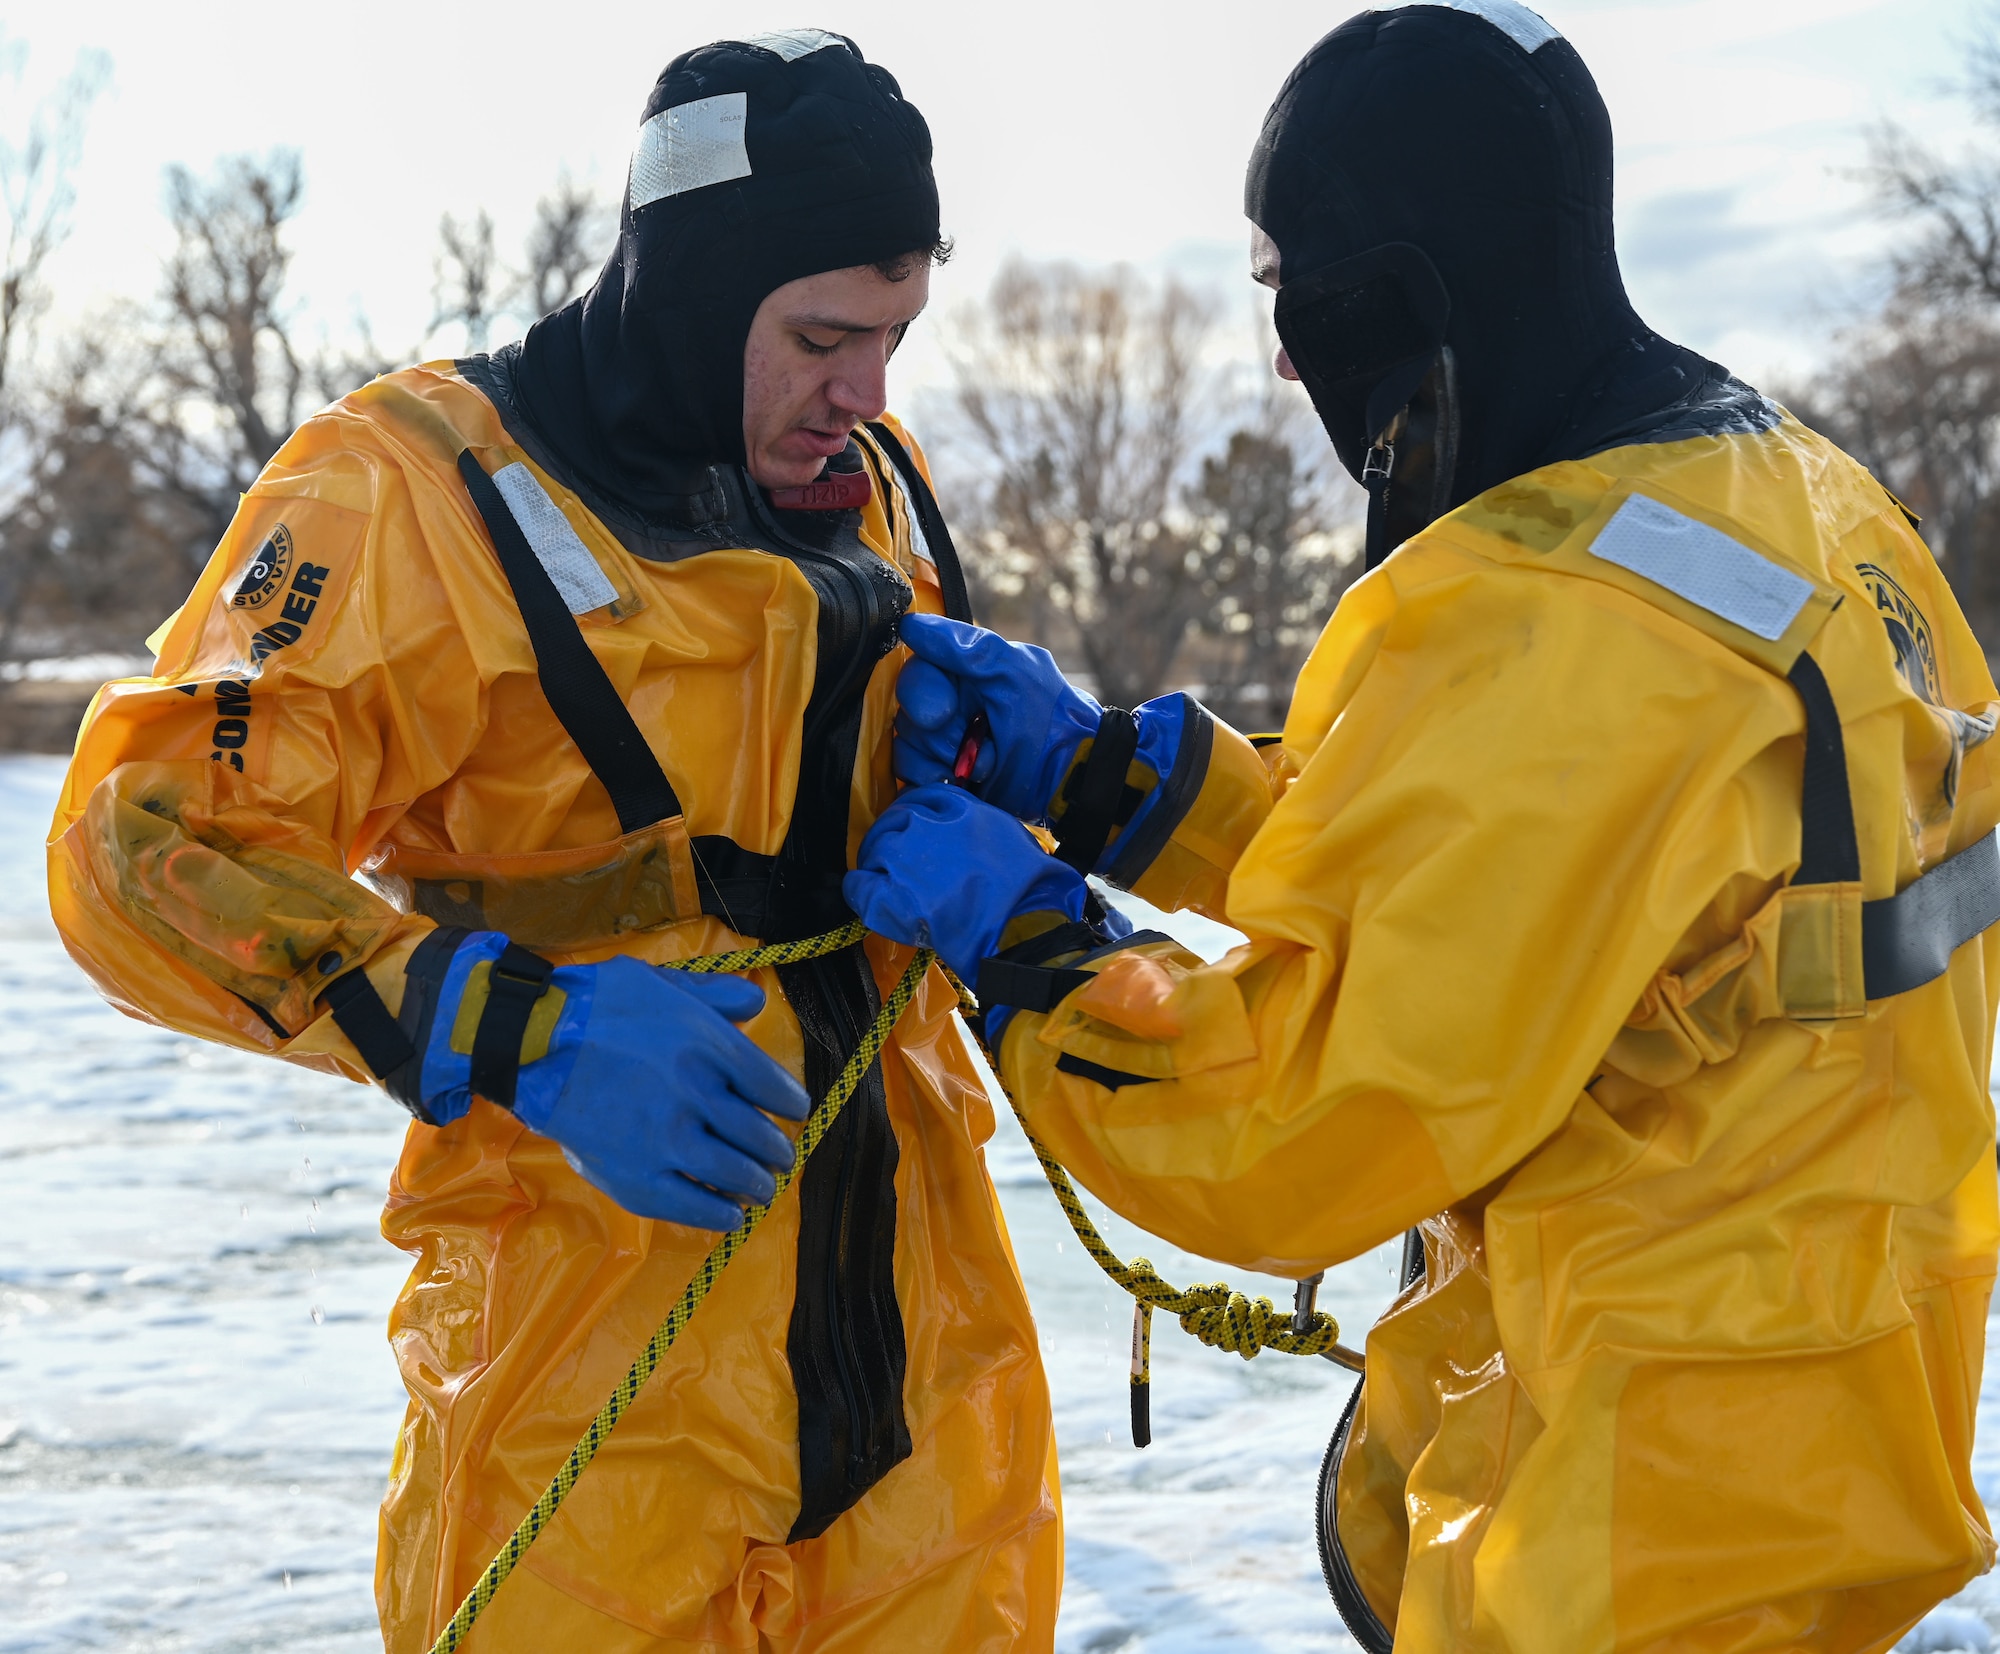 Firefighters participate in ice rescue training.